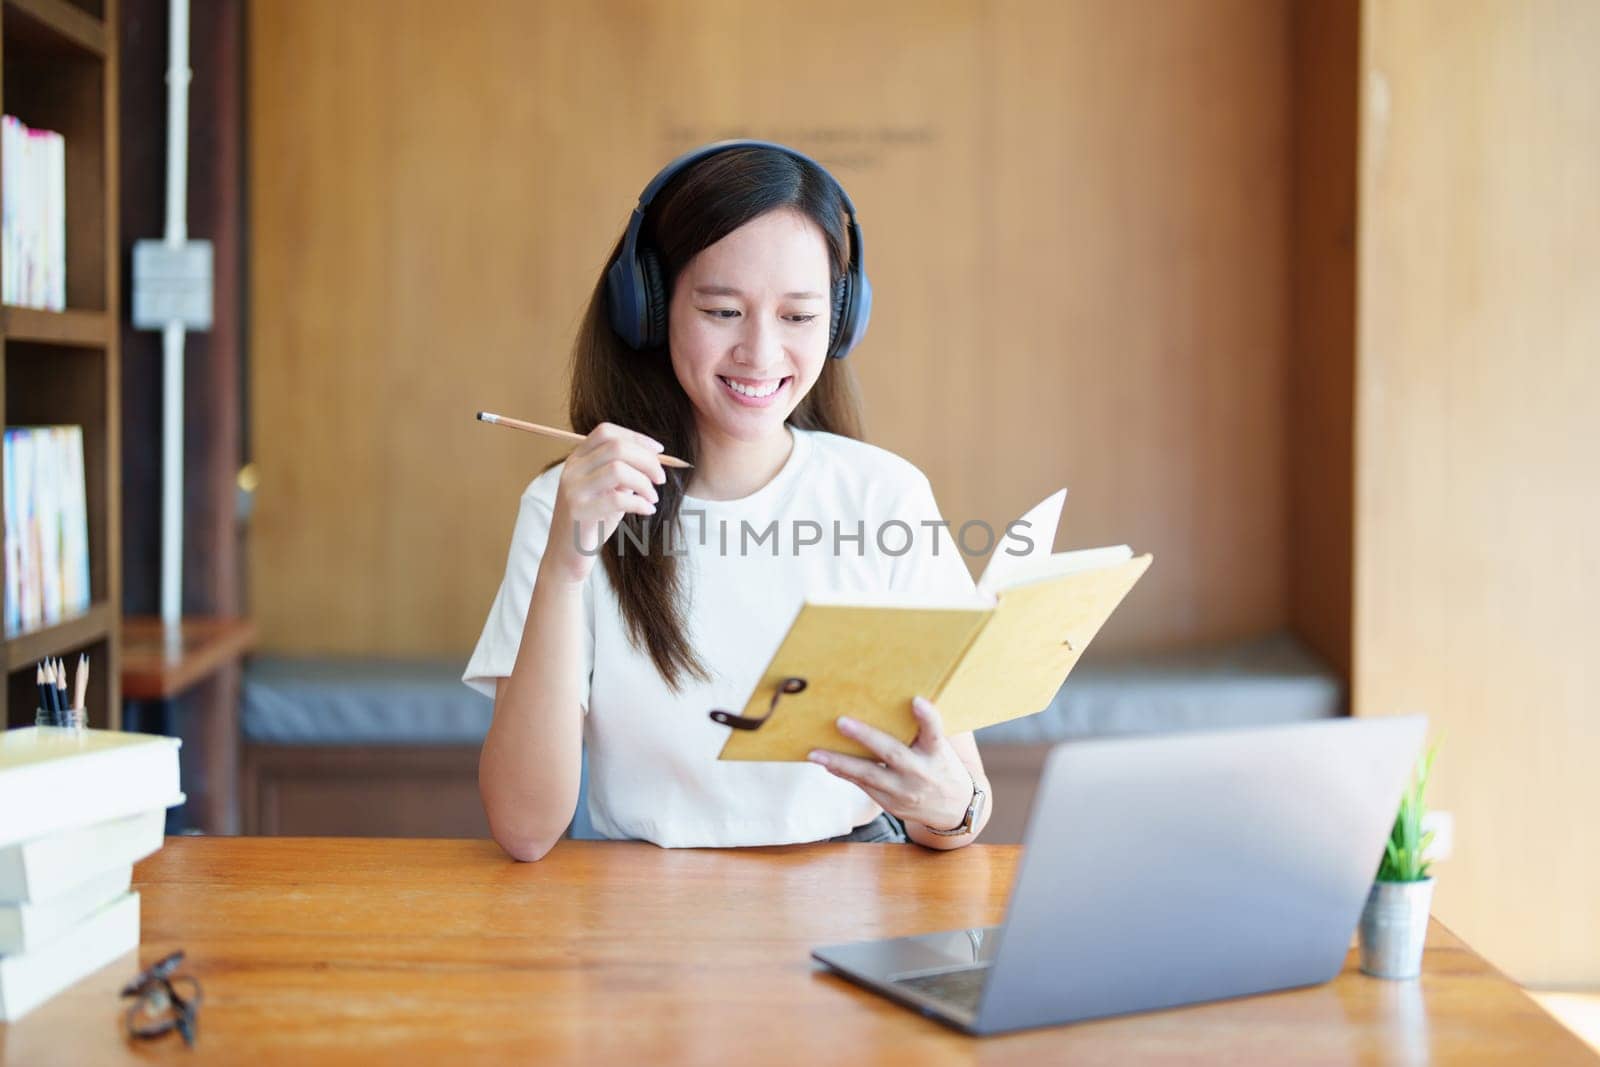 Portrait of a teenage Asian woman using a computer, wearing headphones and using a notebook to study online via video conferencing on a wooden desk in library.